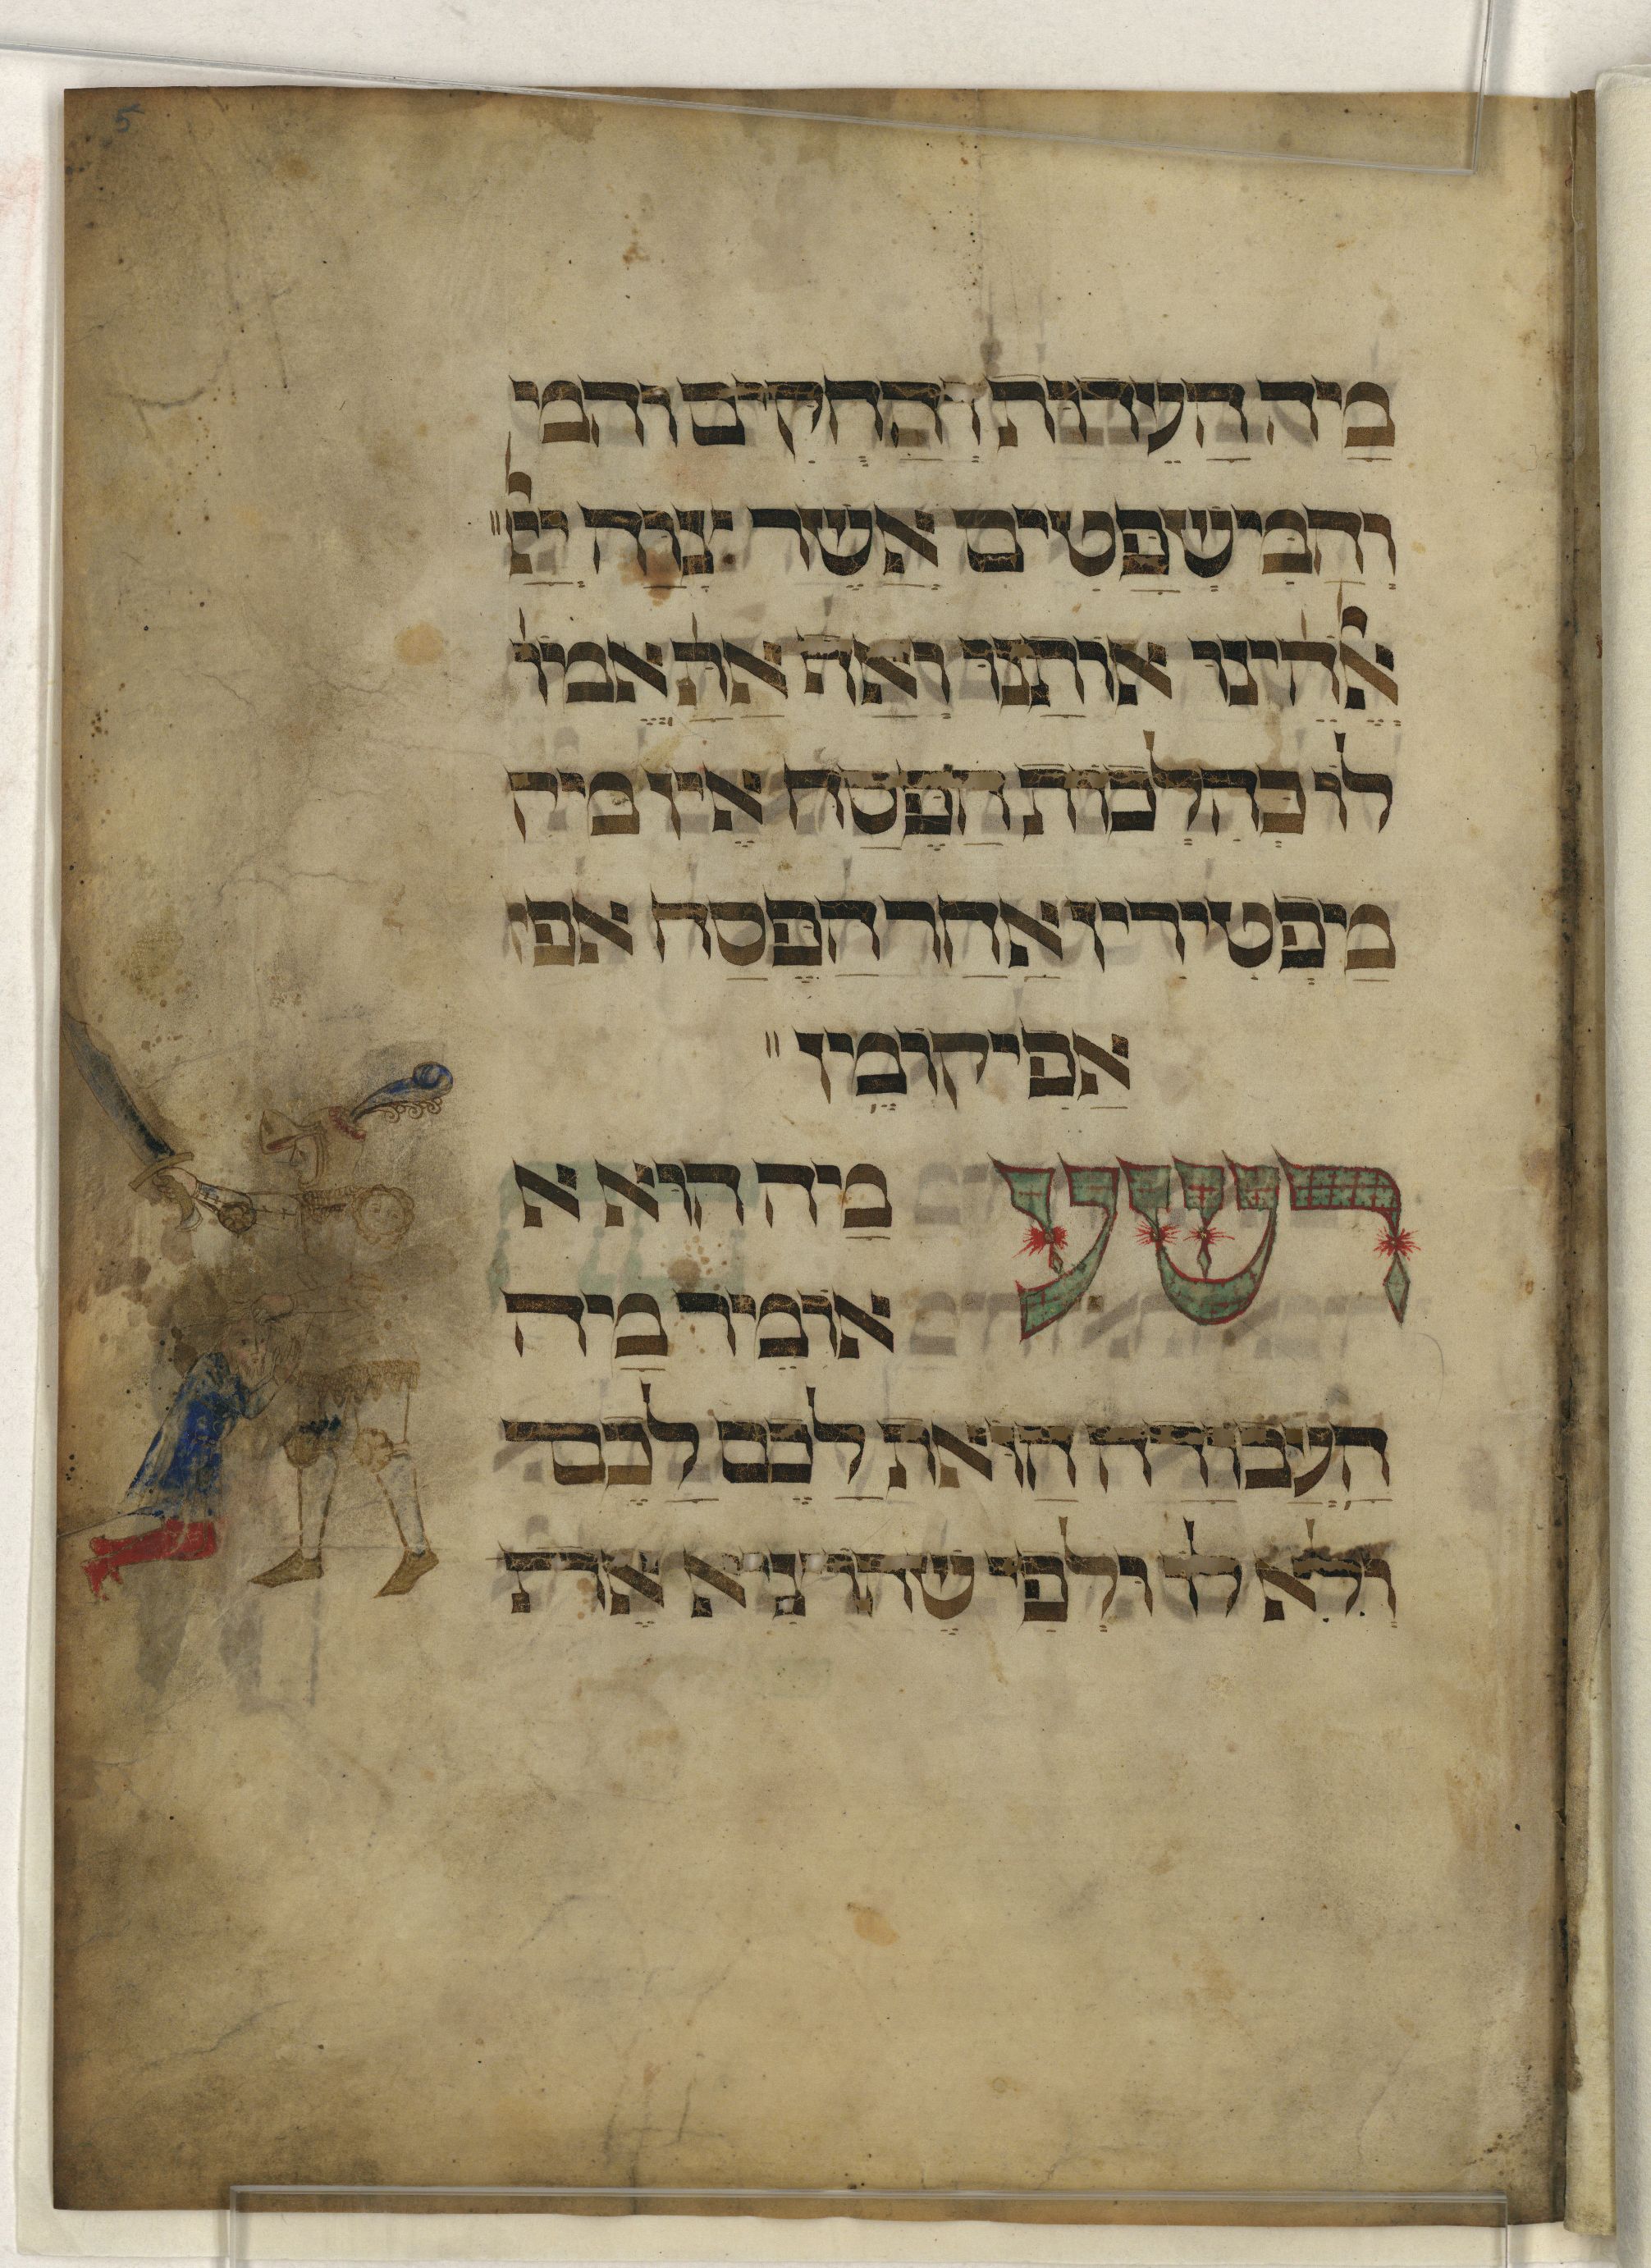 Four Sons, Rothschild Haggadah, 1450, Northern Italy, National Library of Israel